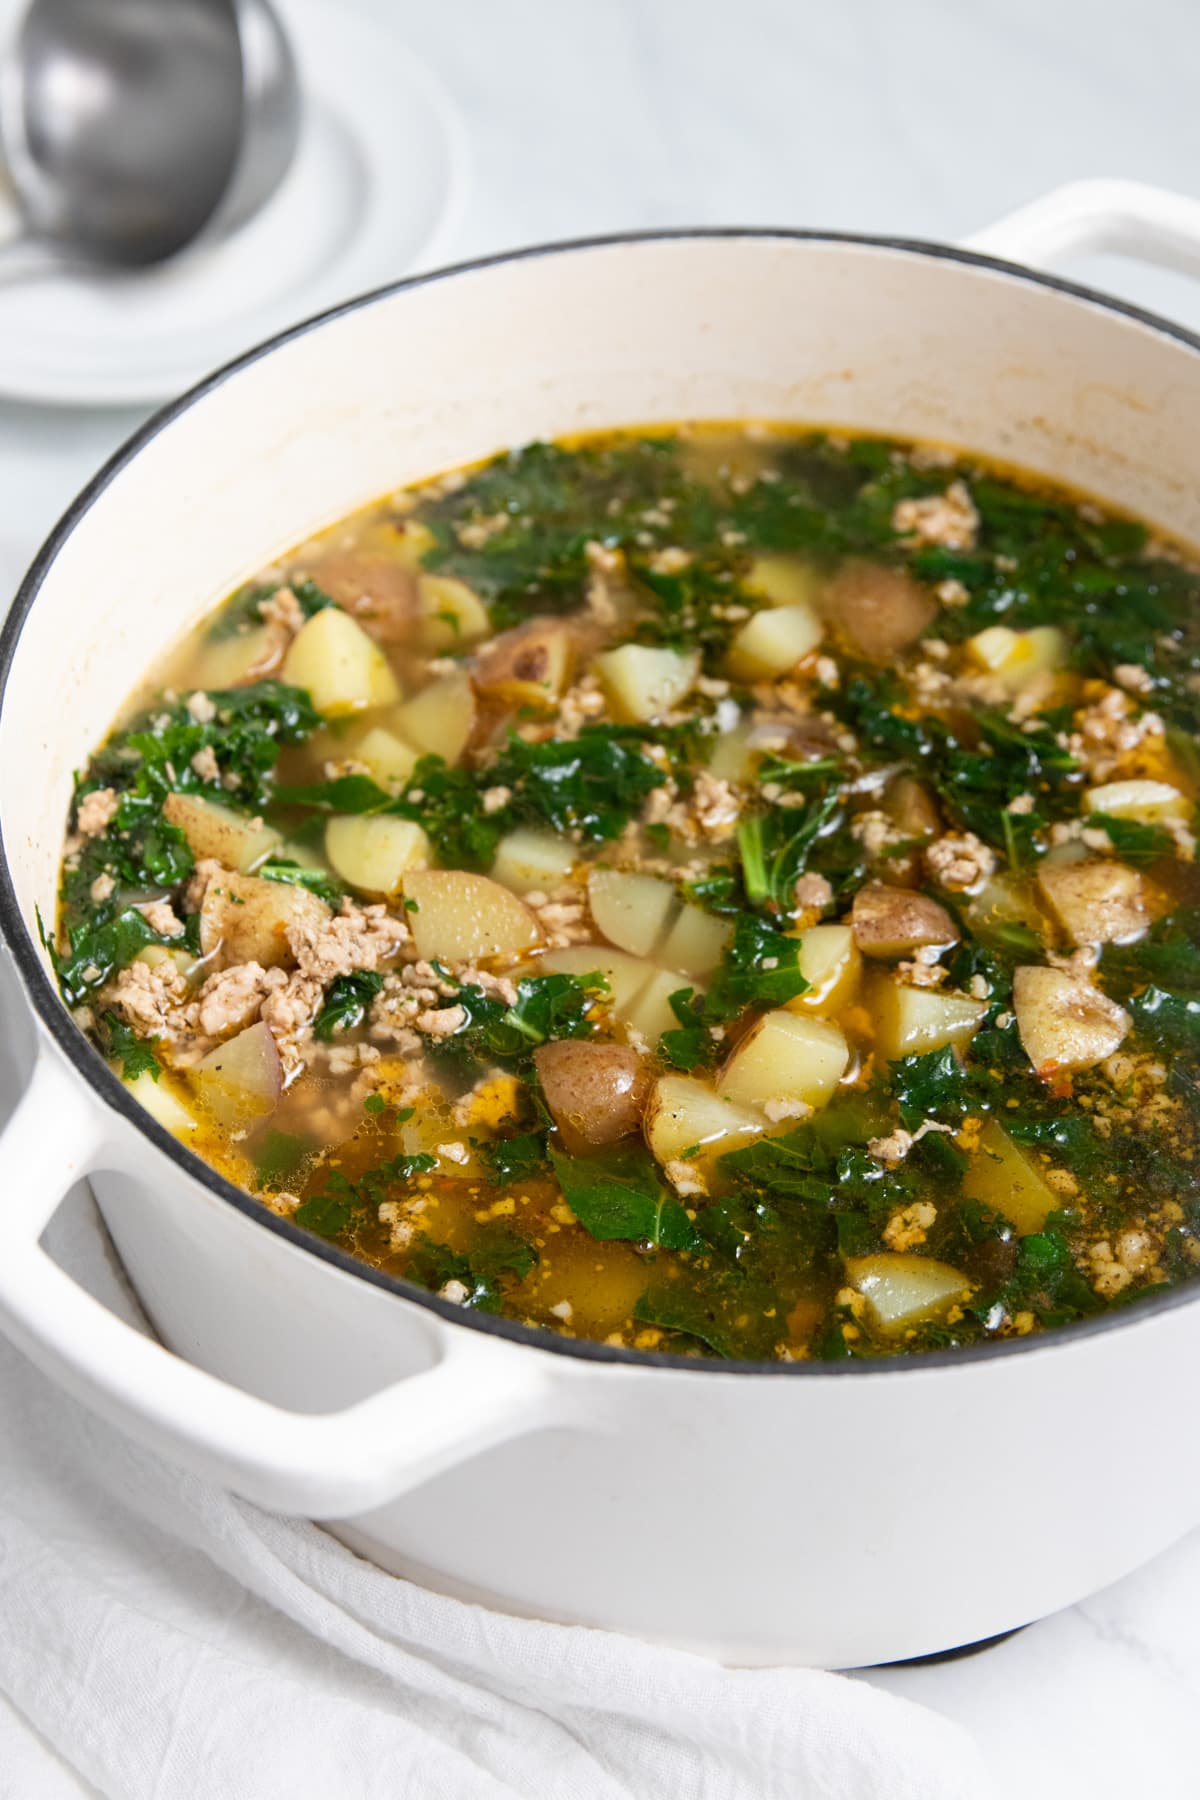 Looking into a soup-filled Dutch oven. The soup is made with diced potatoes, sausage crumbles and chopped kale.